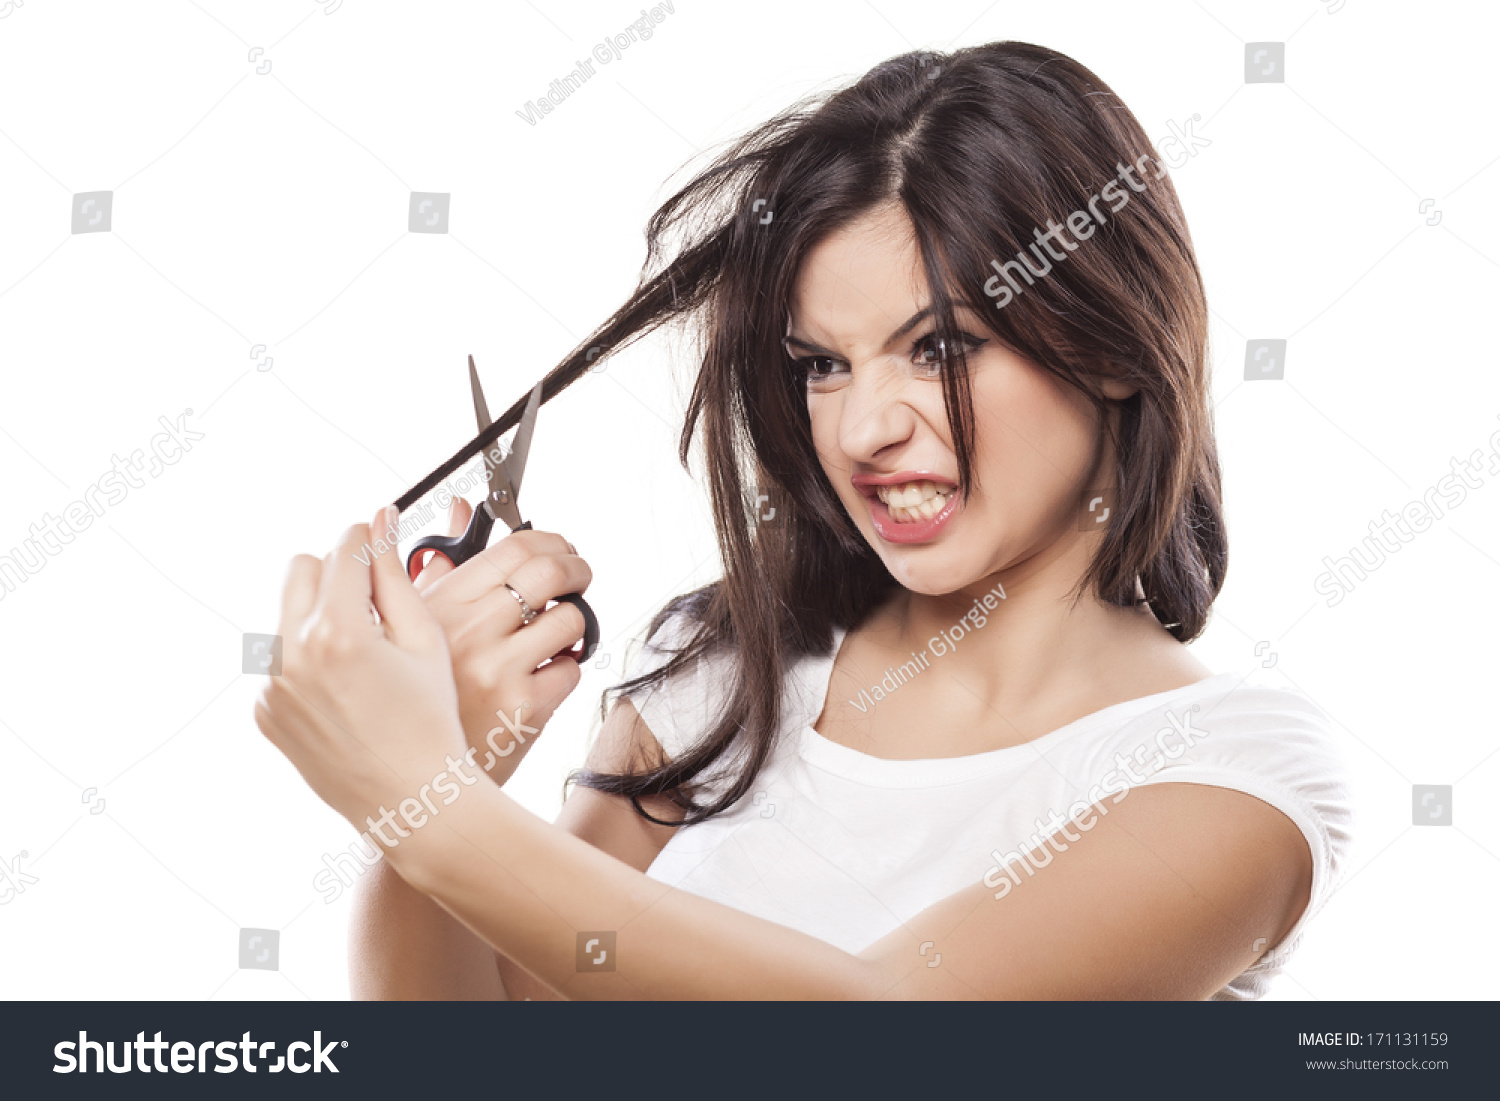 Angry Girl Cuts Her Hair Scissors Stock Photo 171131159 Shutterstock